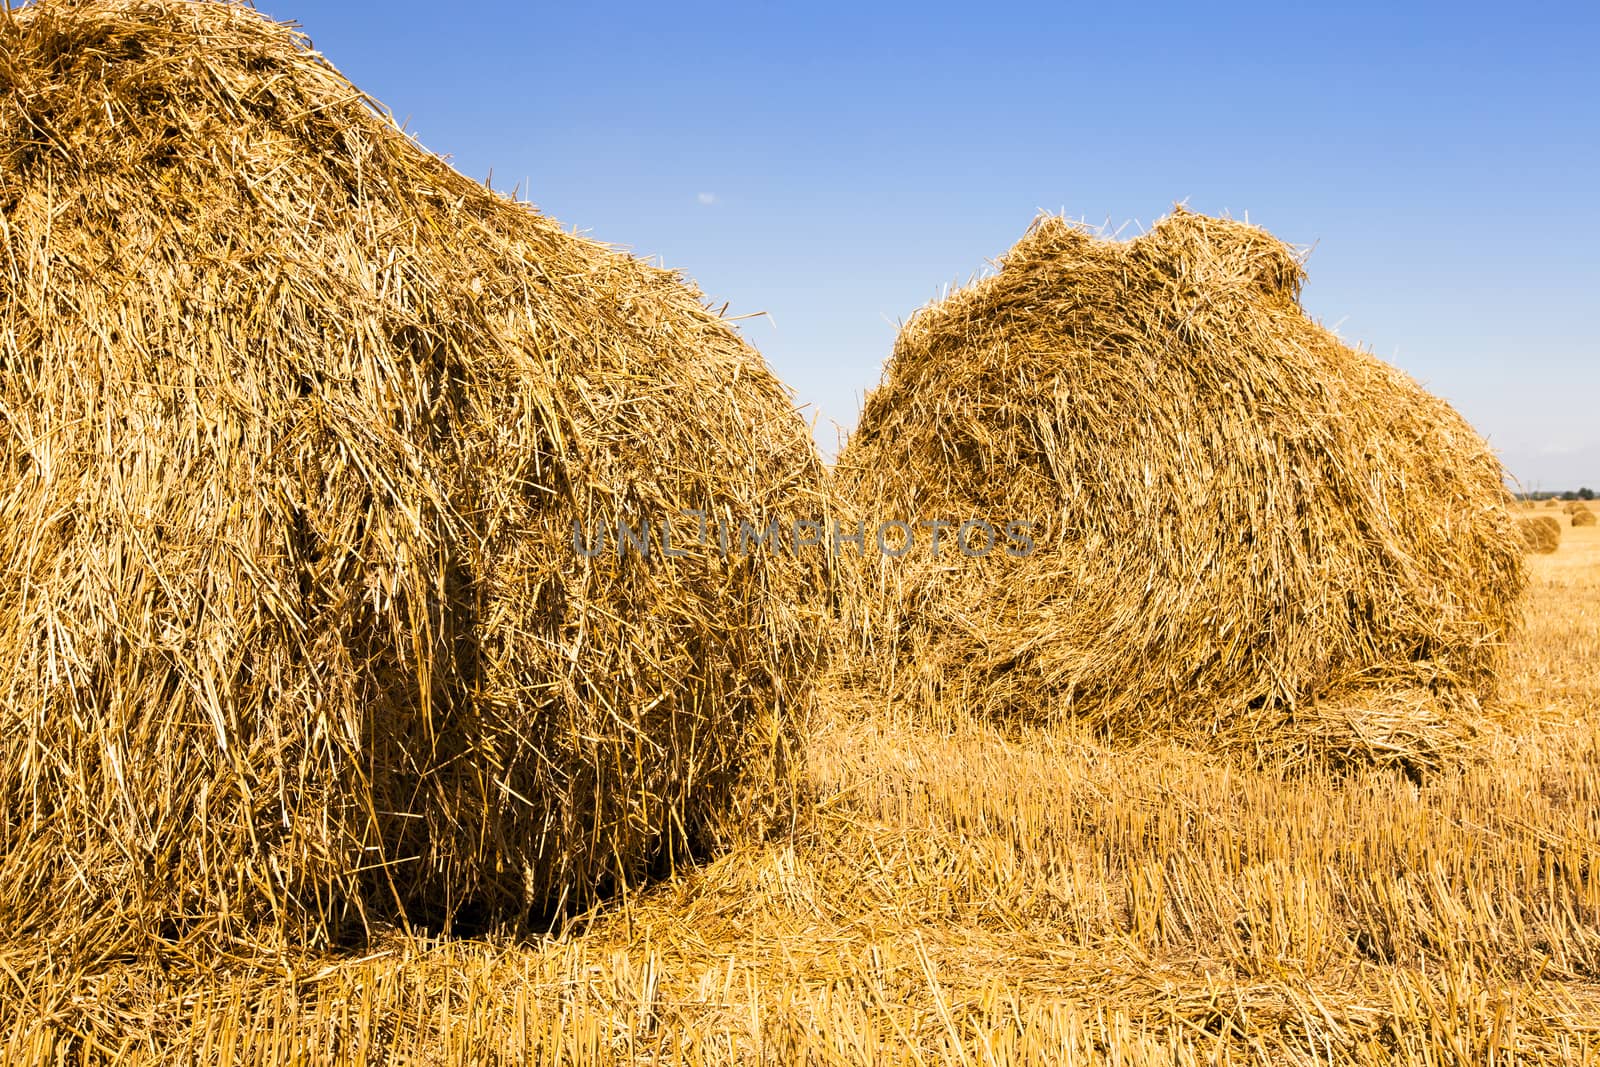   the straw combined nearby from each other a stack after the harvest company